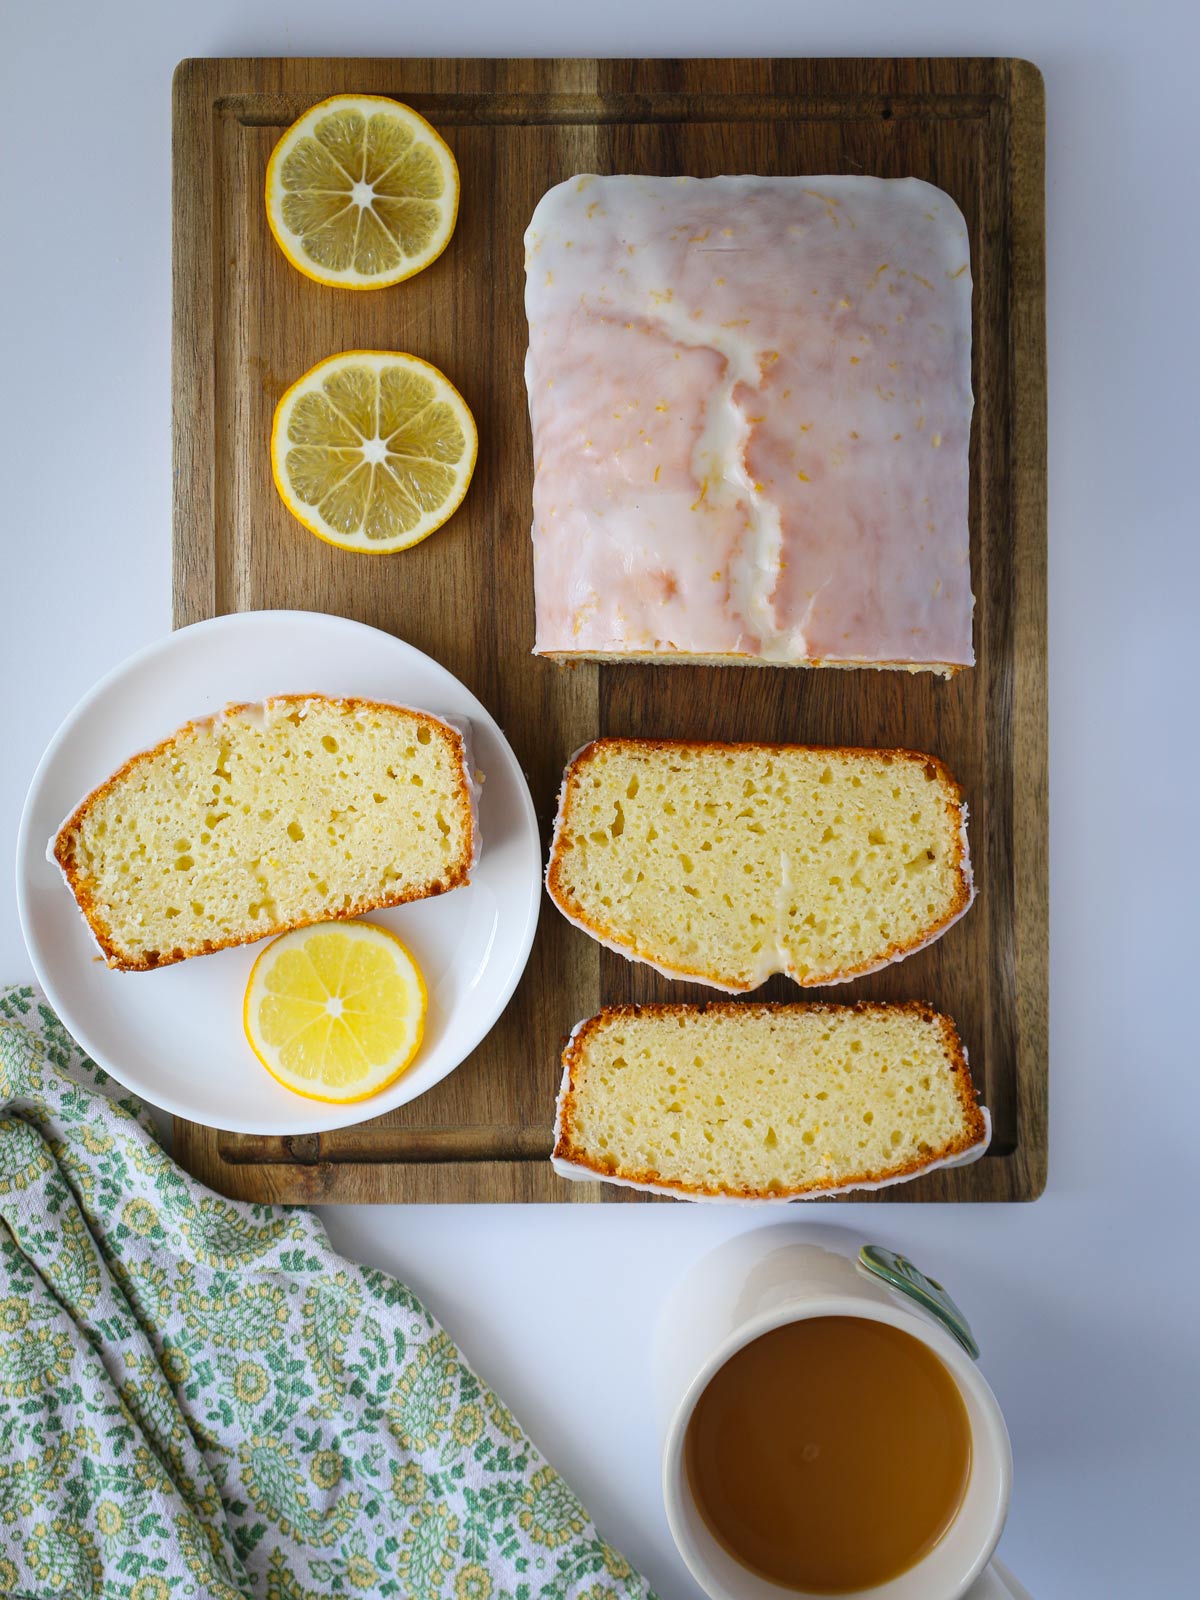 glazed lemon loaf on wooden board with slices, and lemon slices, and cup of tea.